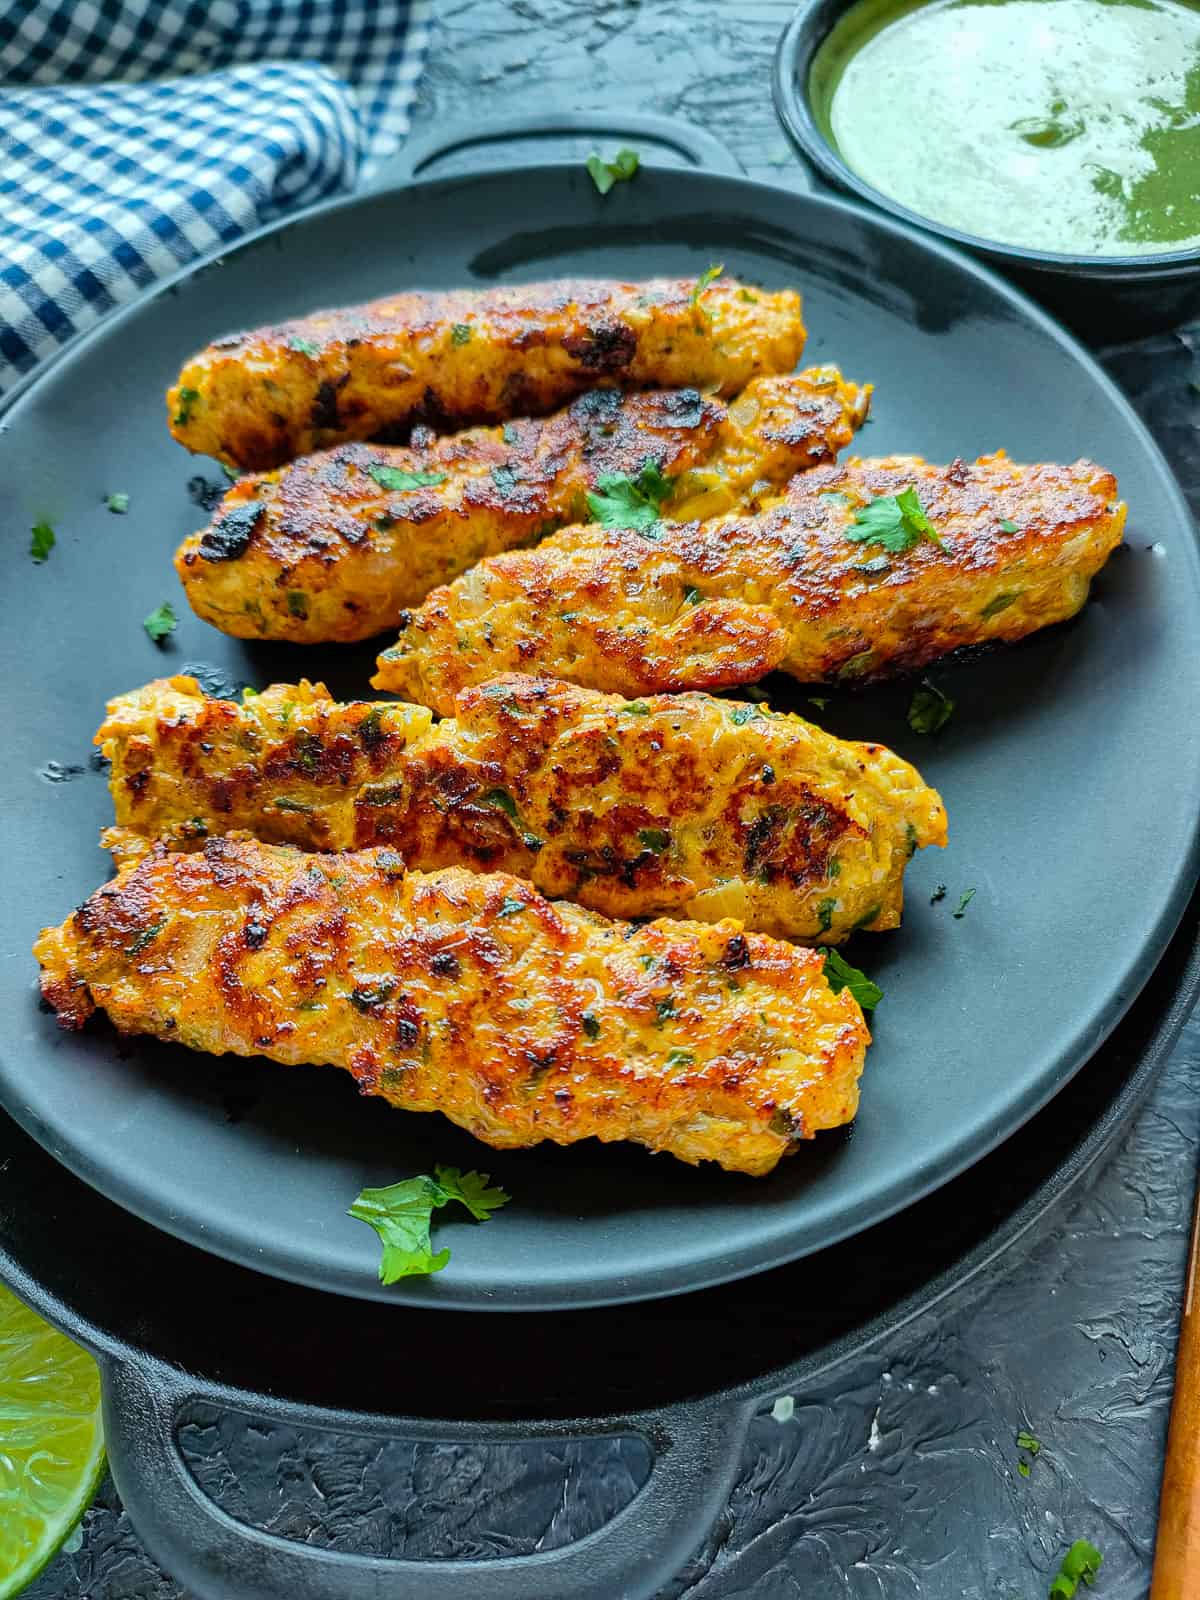 Minced chicken kebabs on a black plate.